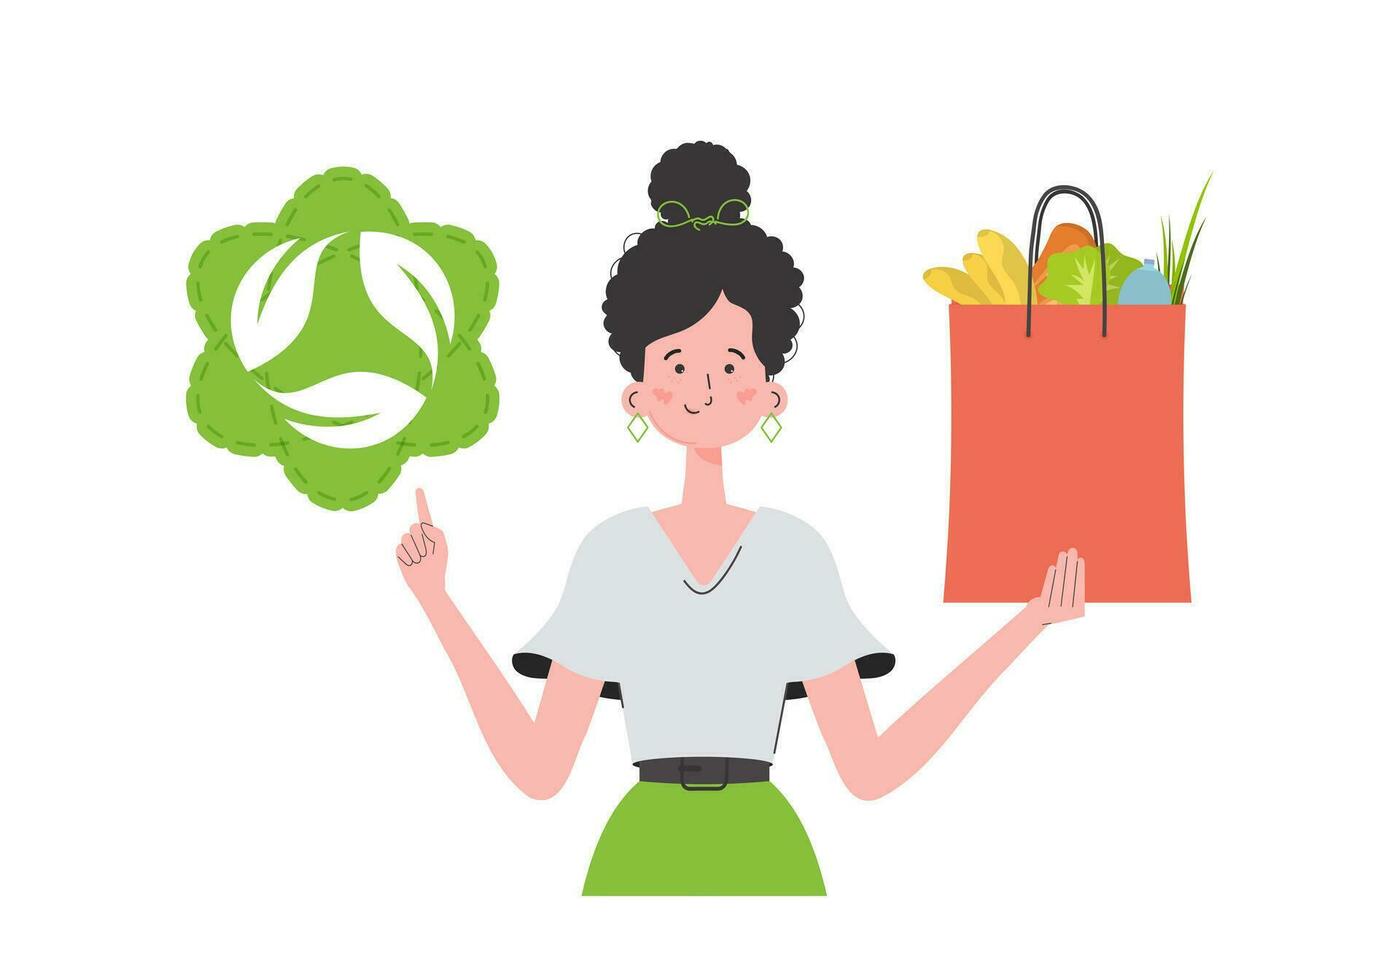 The girl is depicted waist-deep and holds a bag of healthy food in her hands and shows the EKO icon. Isolated. Trend vector illustration.